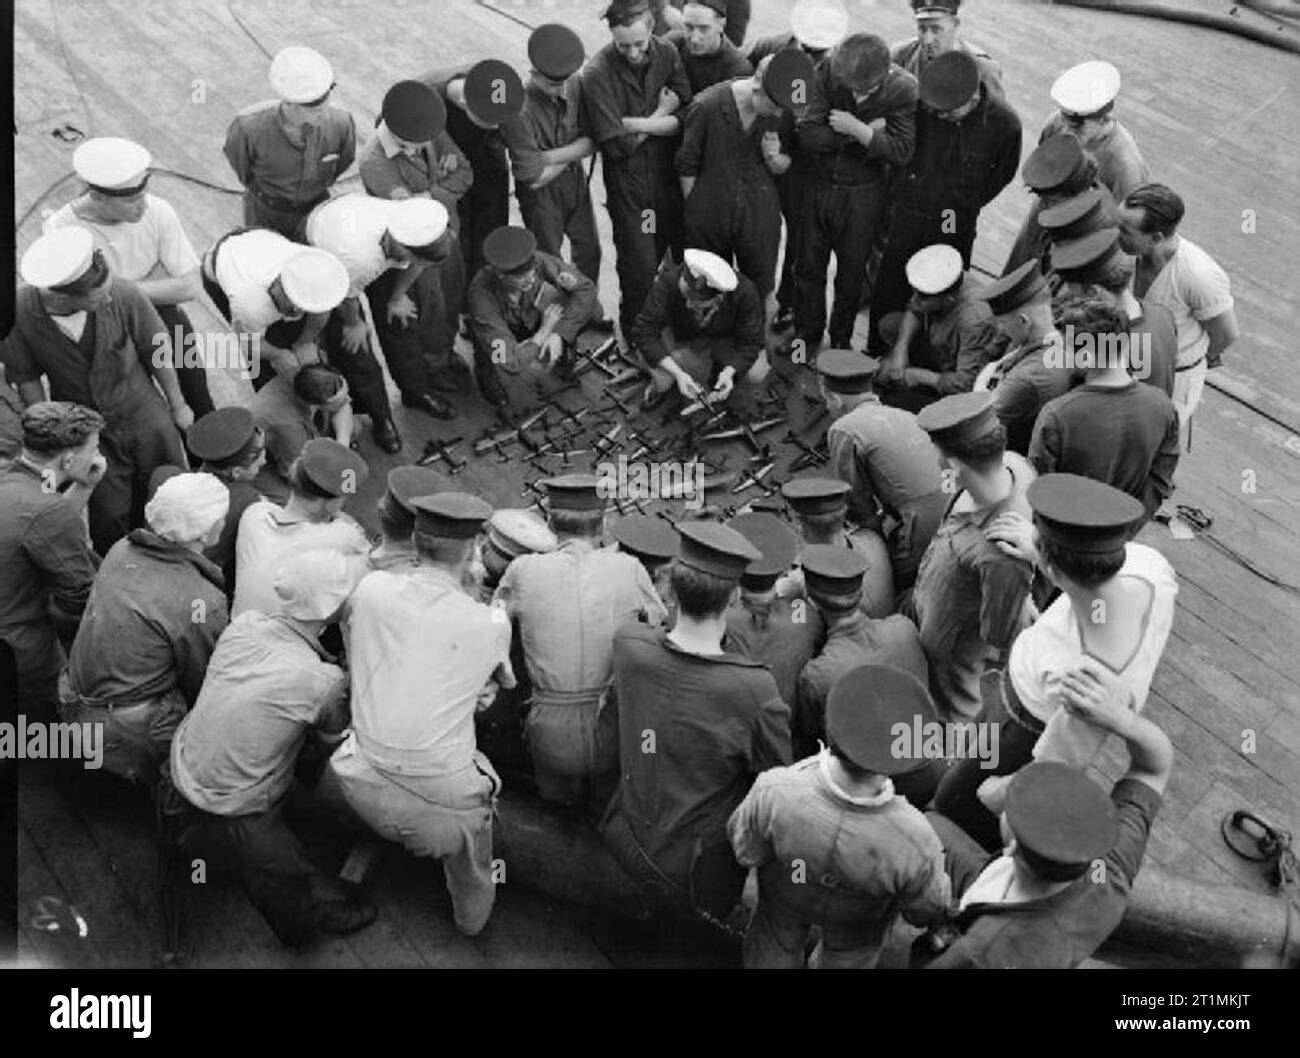 The Royal Navy during the Second World War An aircraft recognition class learning from models on the focsle of HMS RODNEY. The group are stood round a selection of model aircraft on the deck of the battleship. Stock Photo